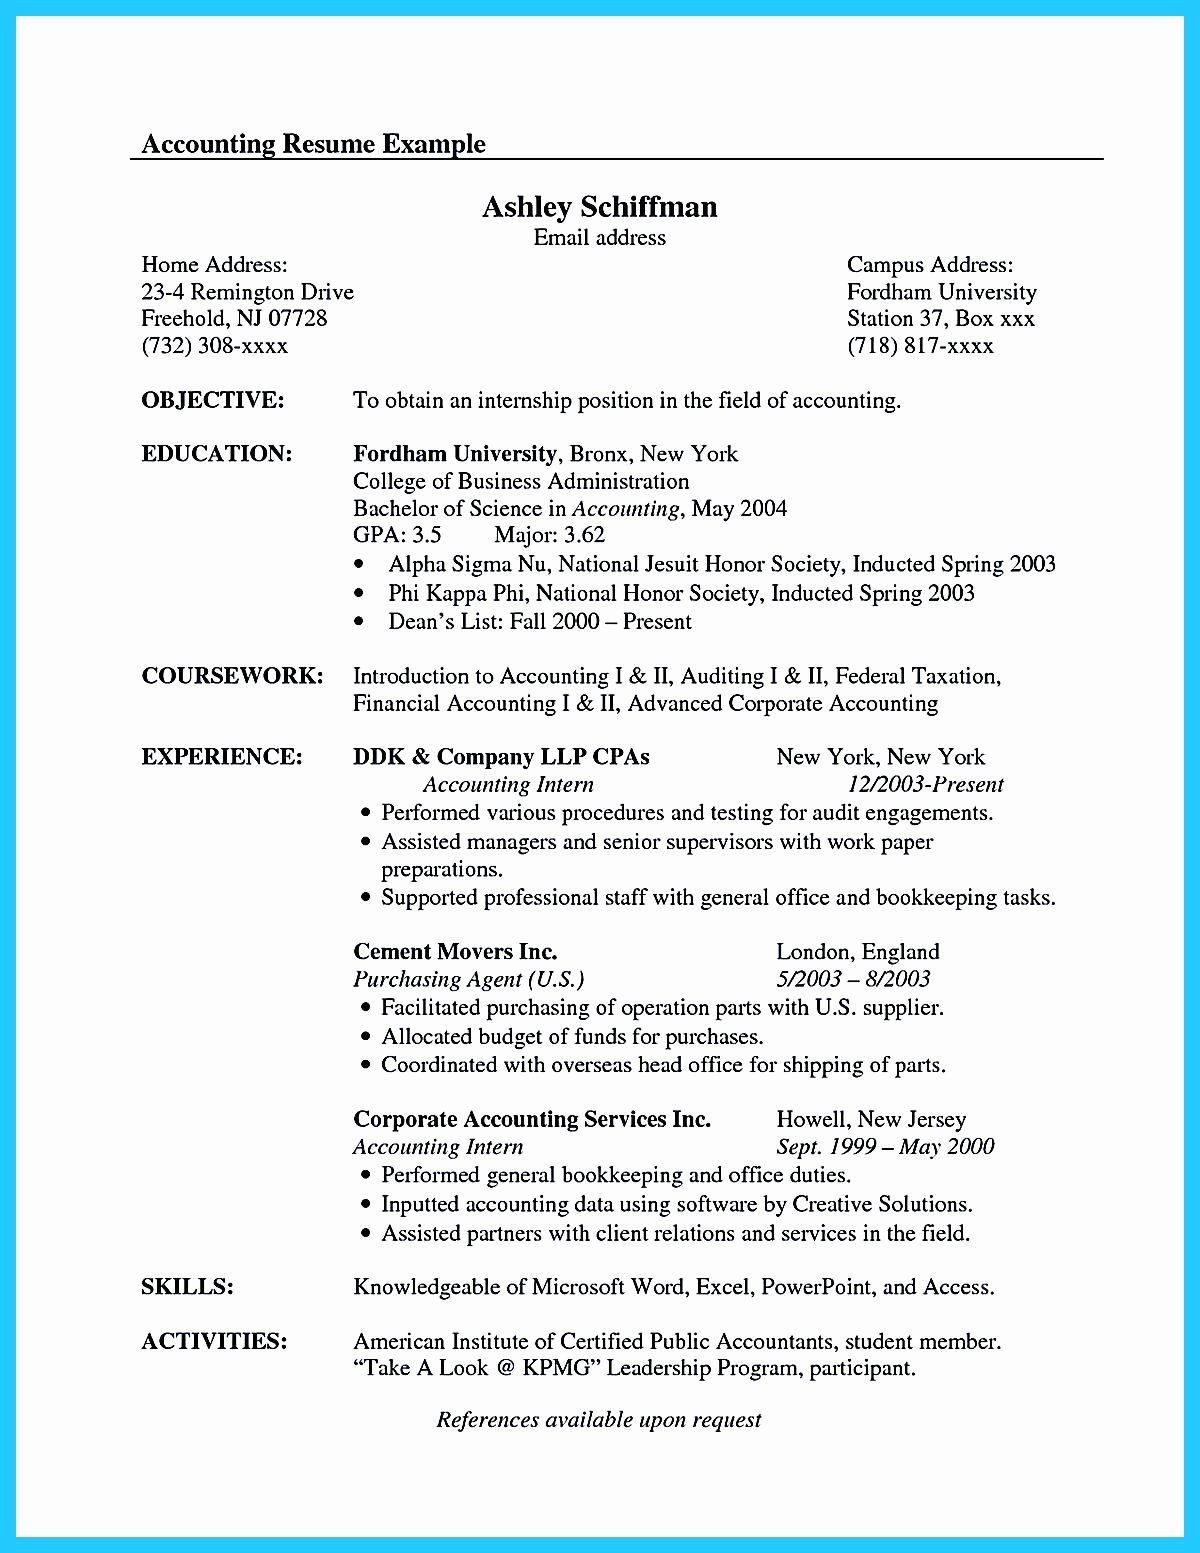 Free Sample Resume for Entry Level Accounting and Finance Accounting Graduate Resume No Experienceâ¢ Printable Resume …